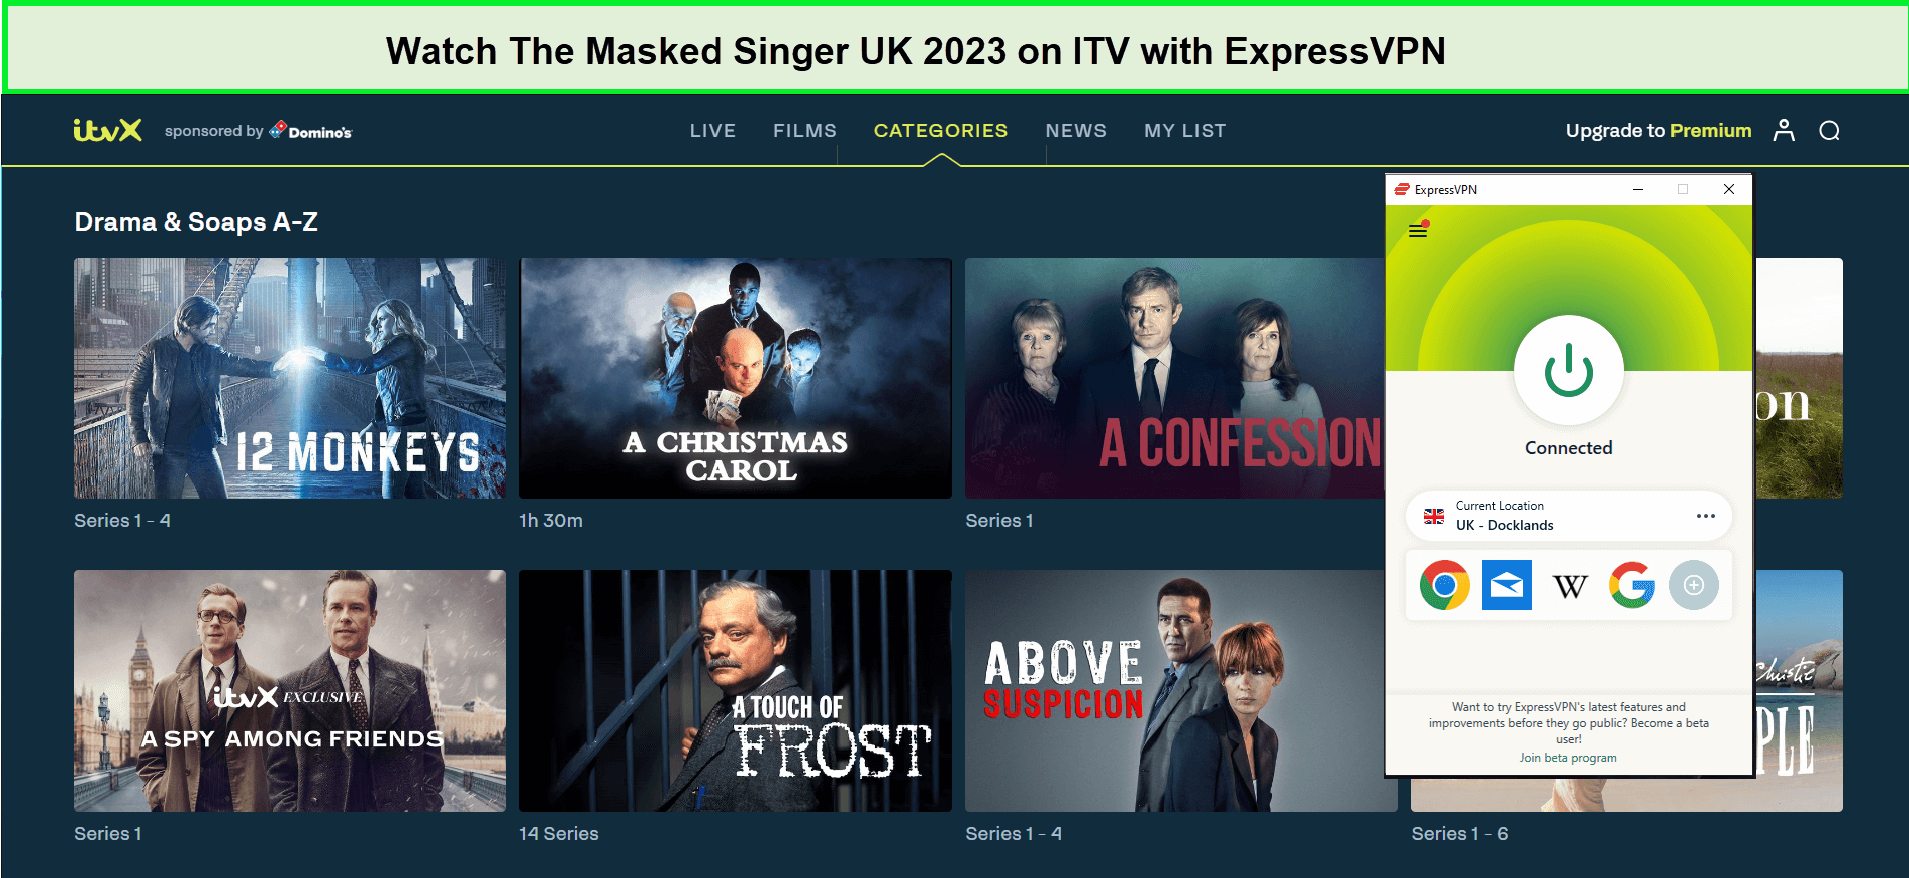 Watch-The-Masked-Singer-UK-2023-in-Canada-on-ITV-with-ExpressVPN